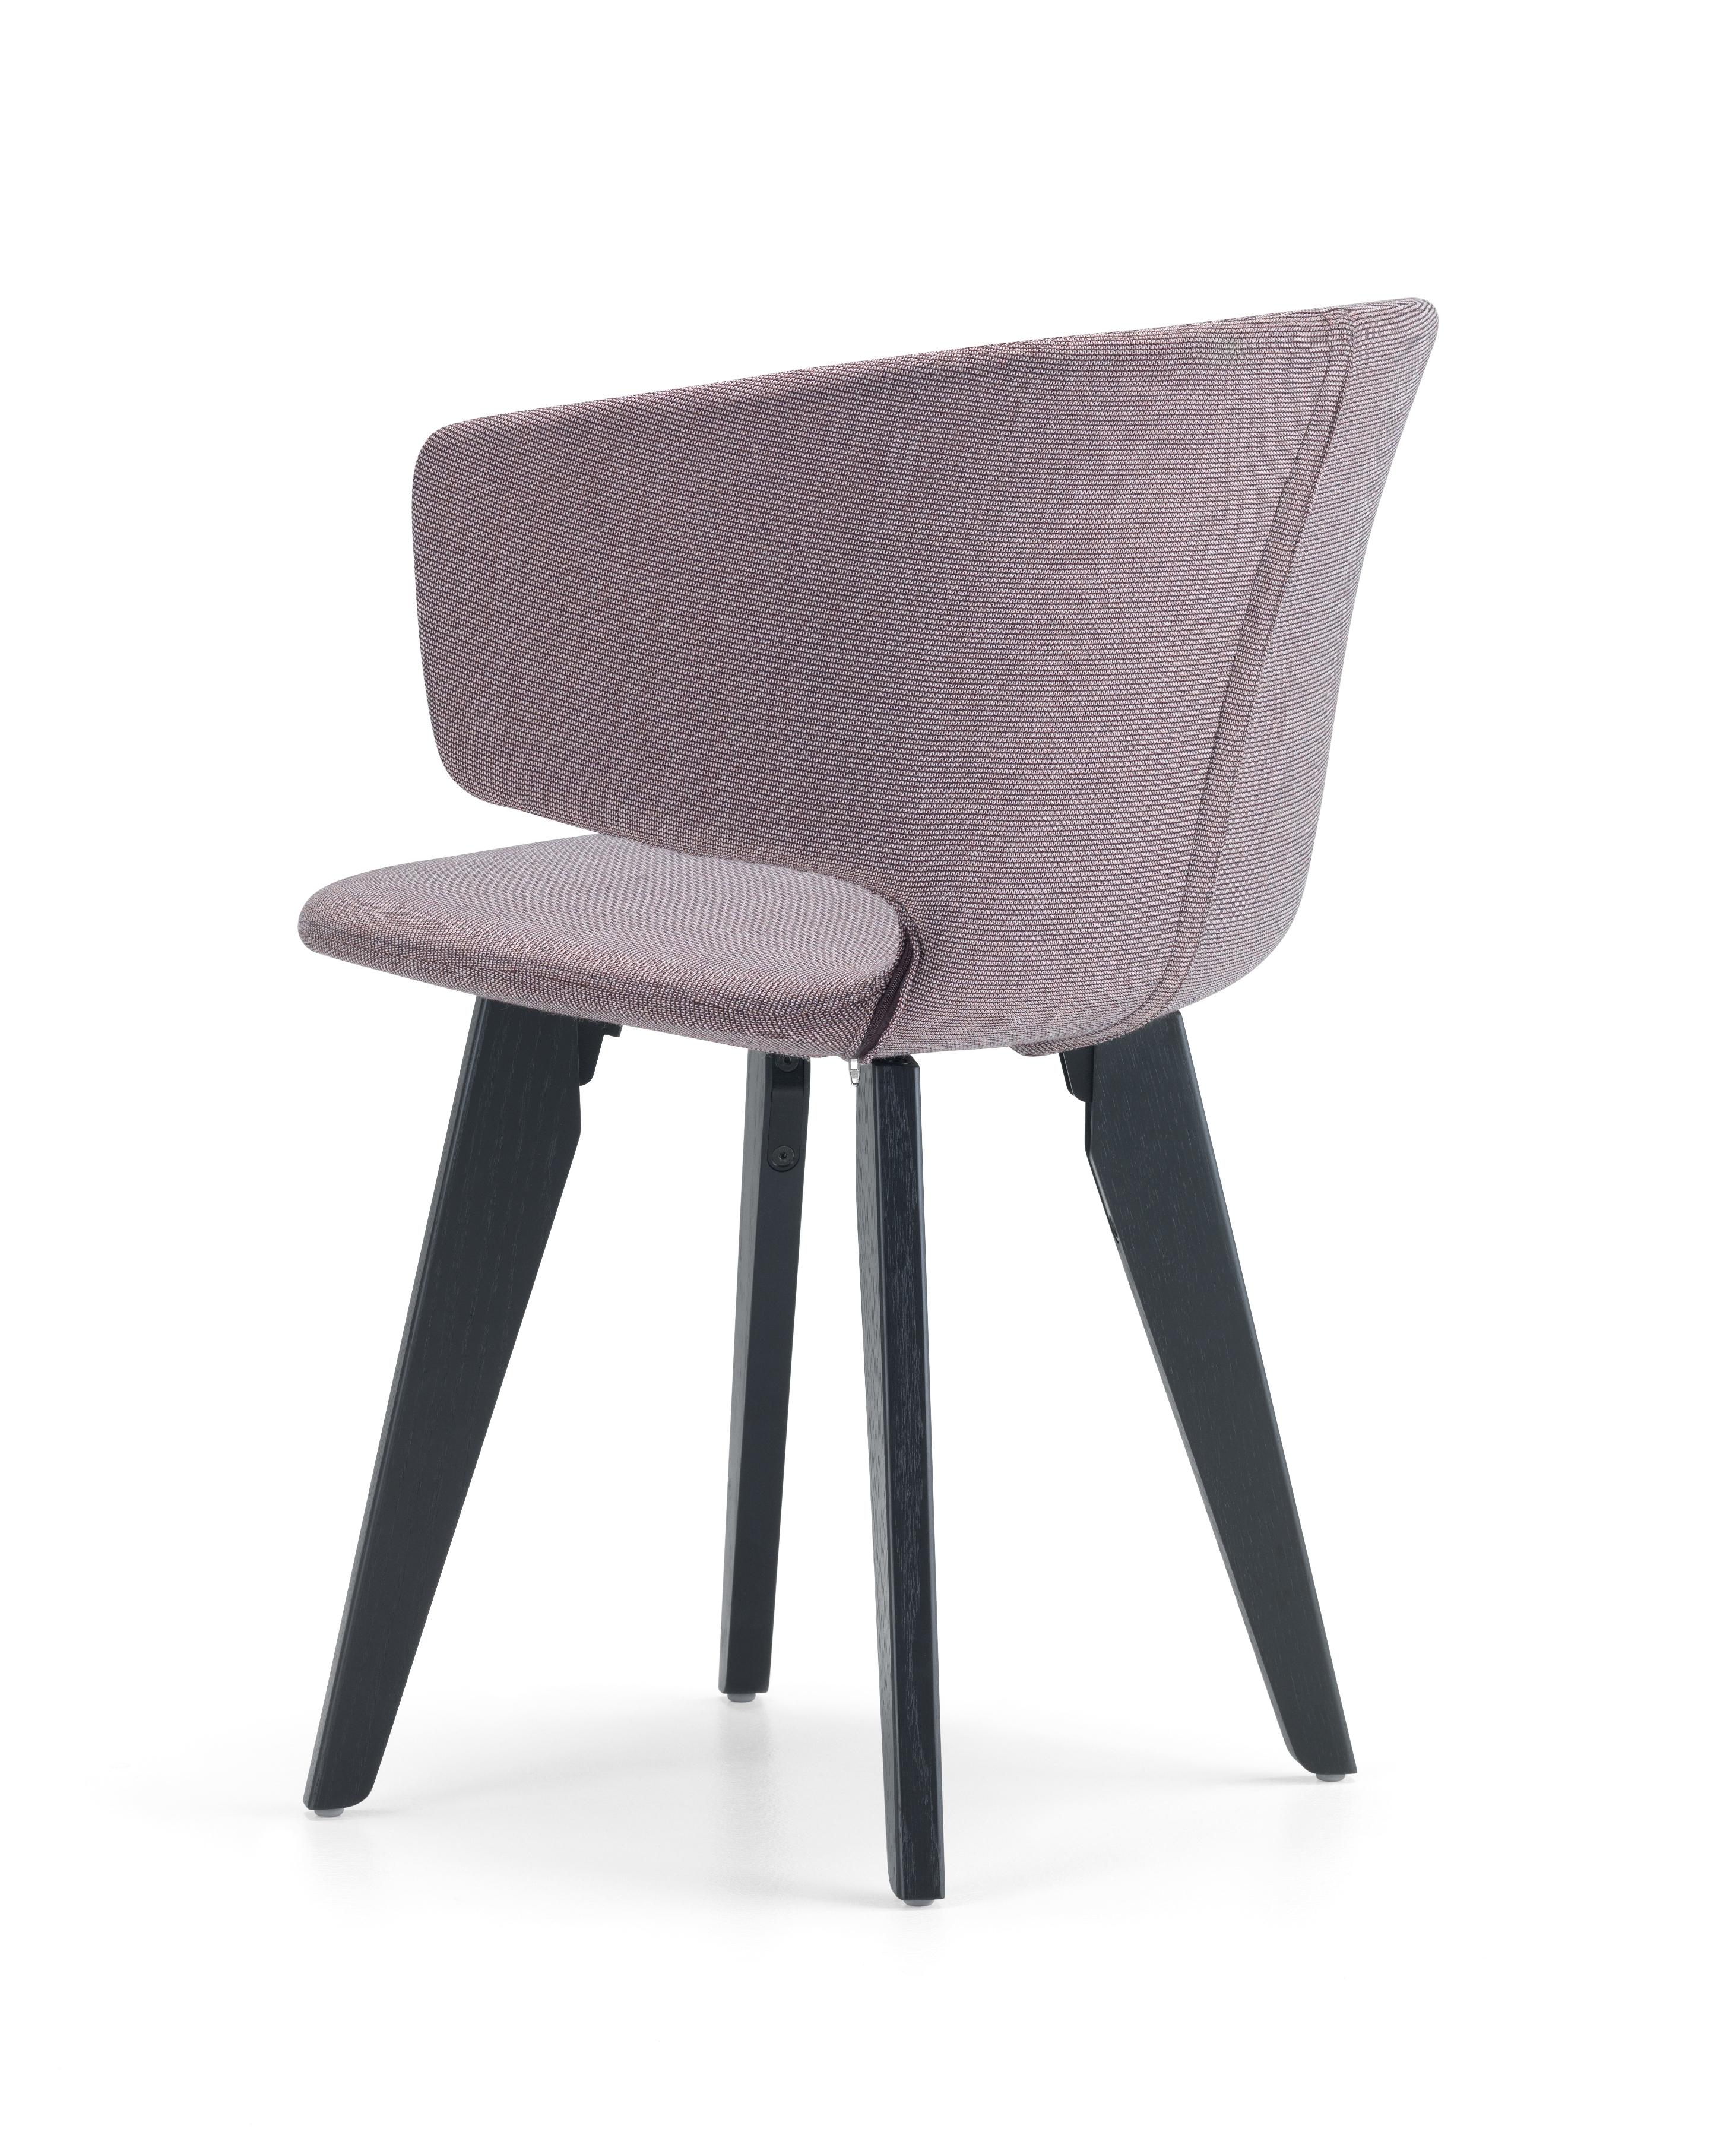 Alias 565 Taormina Chair in Purple & Black Stained Oak Frame by Alfredo Häberli

Armchair with solid oak wood structure. Seat and back in solid plastic material padded with CFC free expanded polyurethane foam, removable cover in fabric,